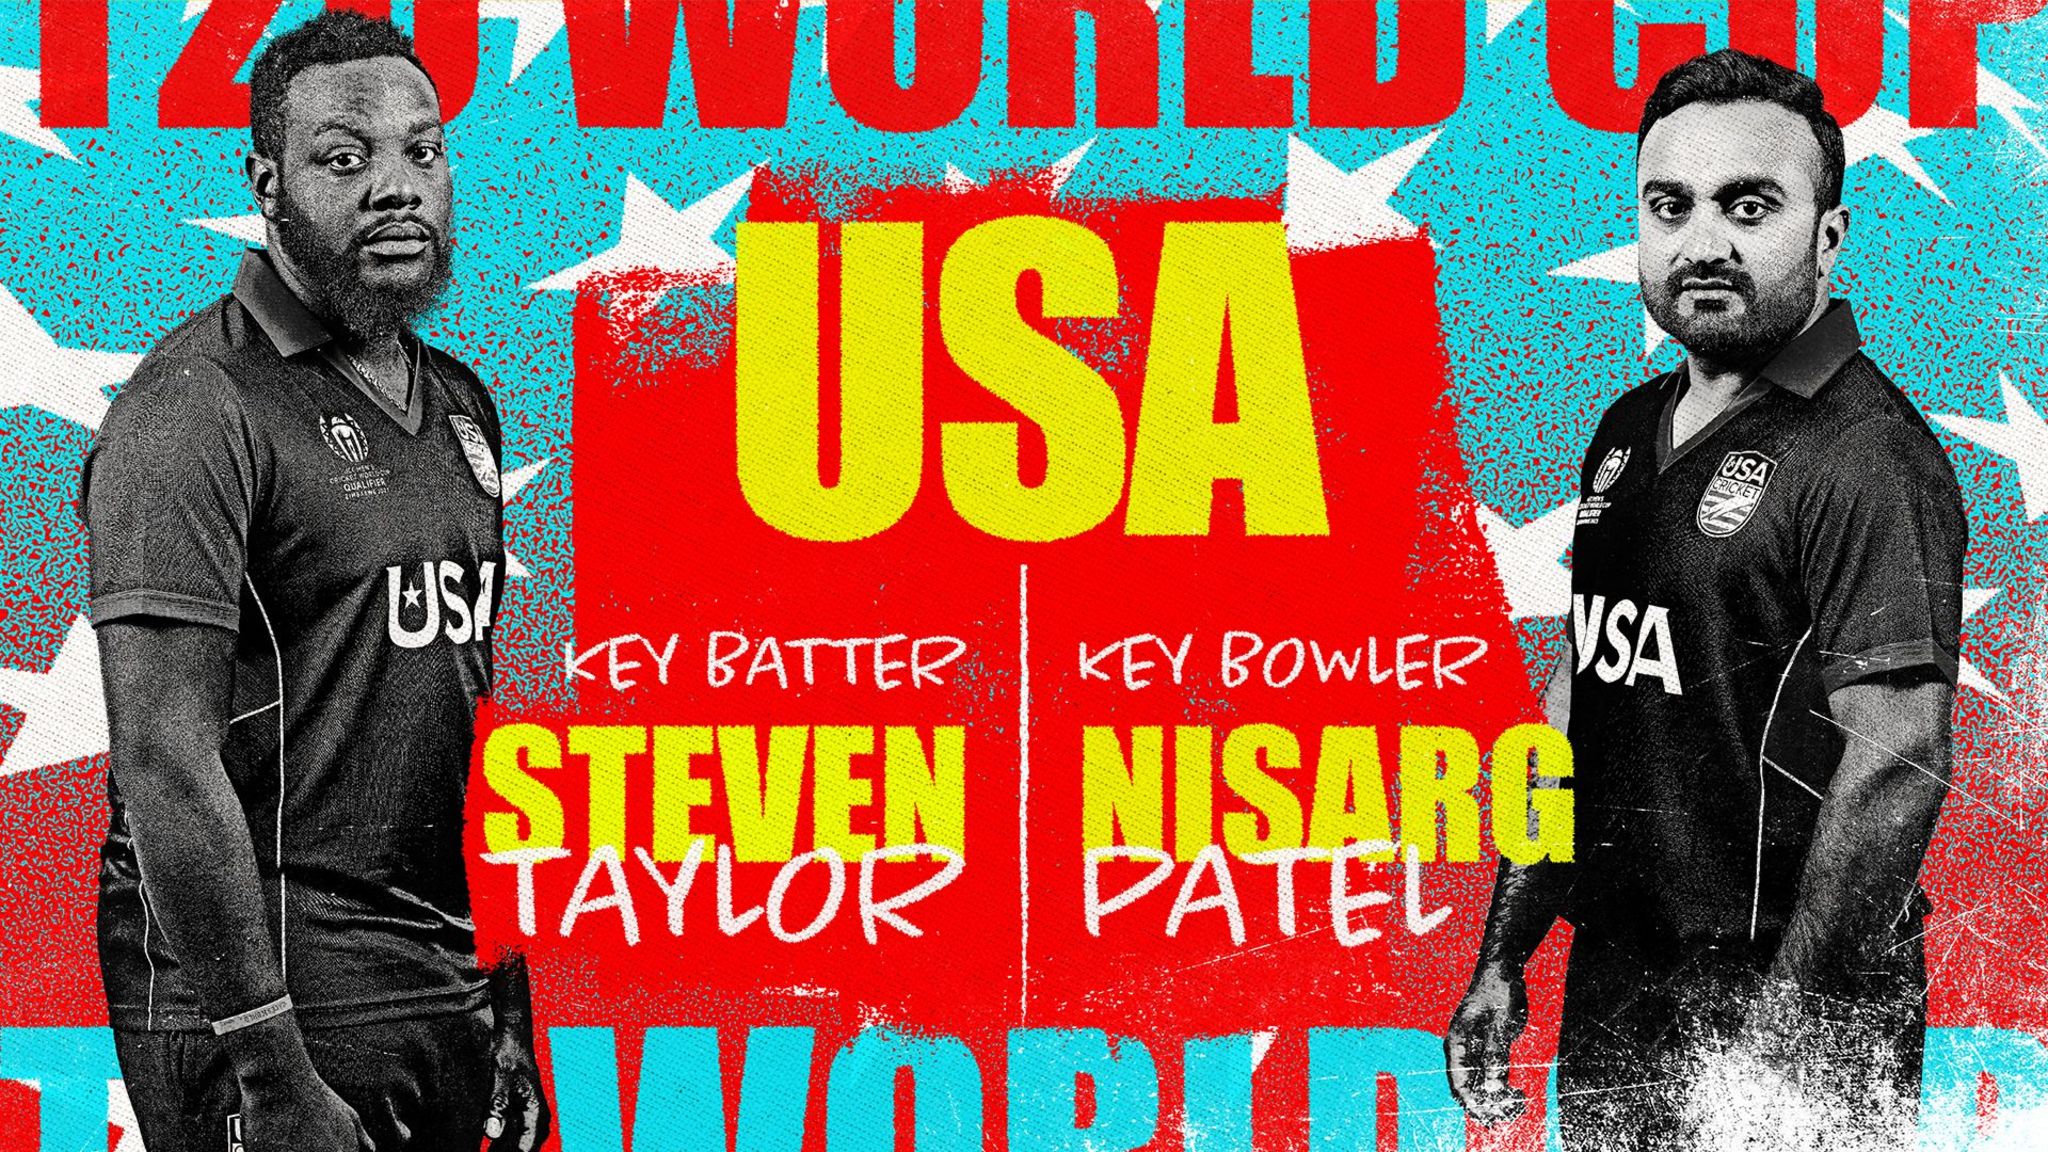 A graphic showing Steven Taylor and Nisarg Patel at USA's key batter and bowler at the Men's T20 World Cup